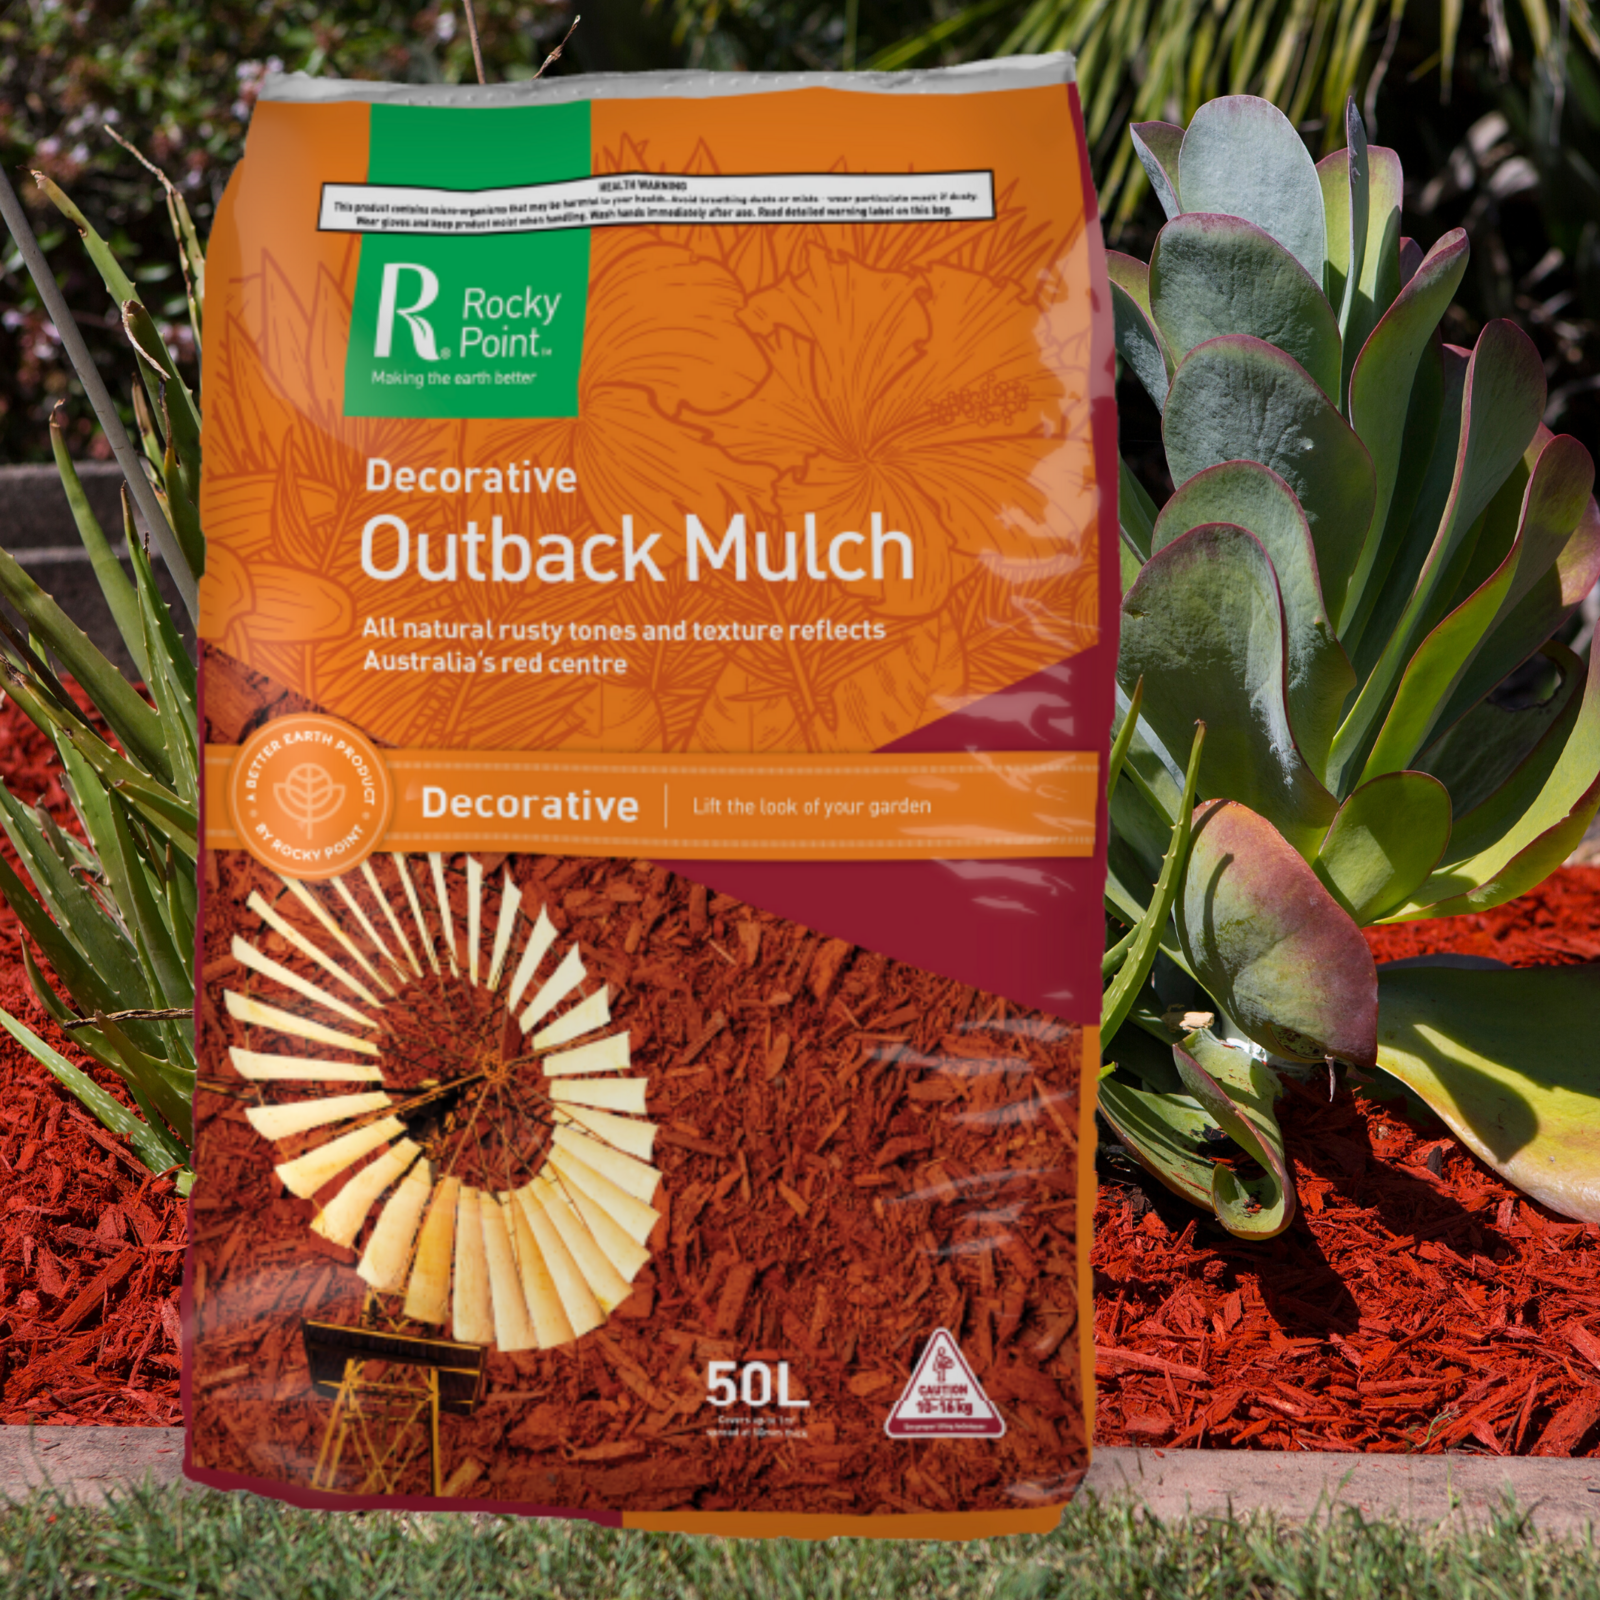 Buy bamboo. Buy Rocky Point Outback Mulch.